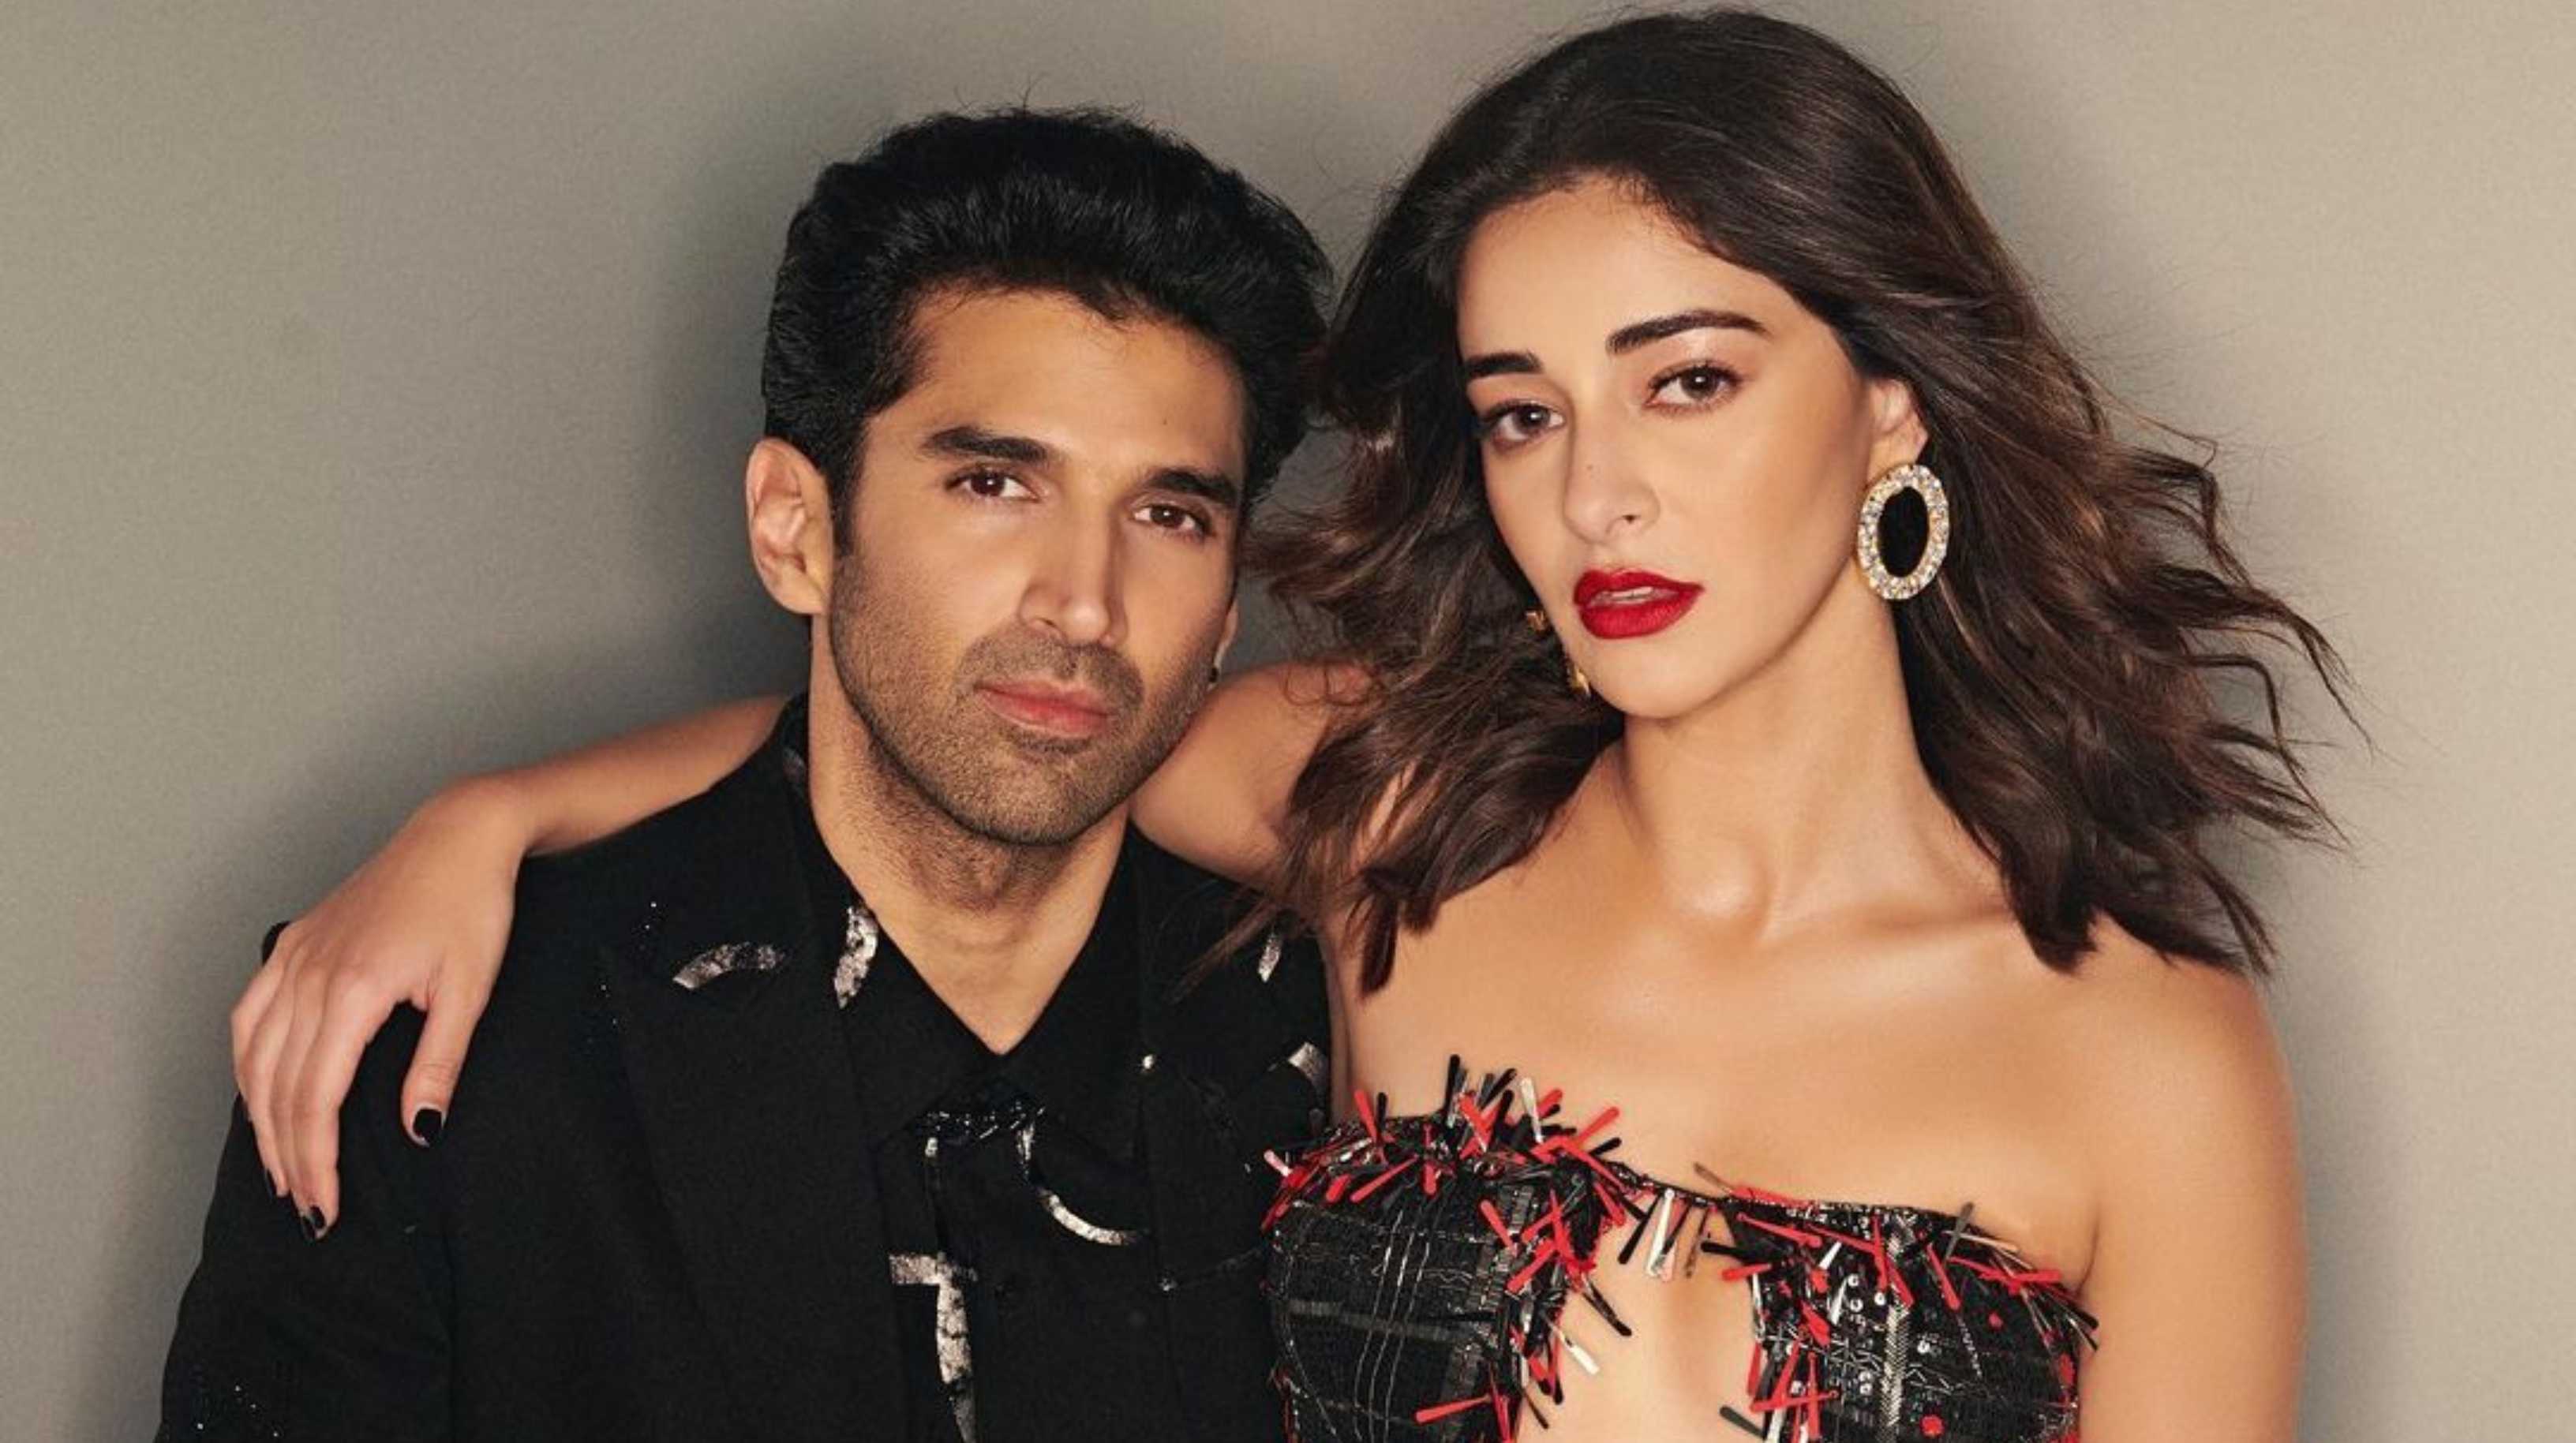 Ananya Panday and Aditya Roy Kapur are in love but taking it slow? Here’s what their families want